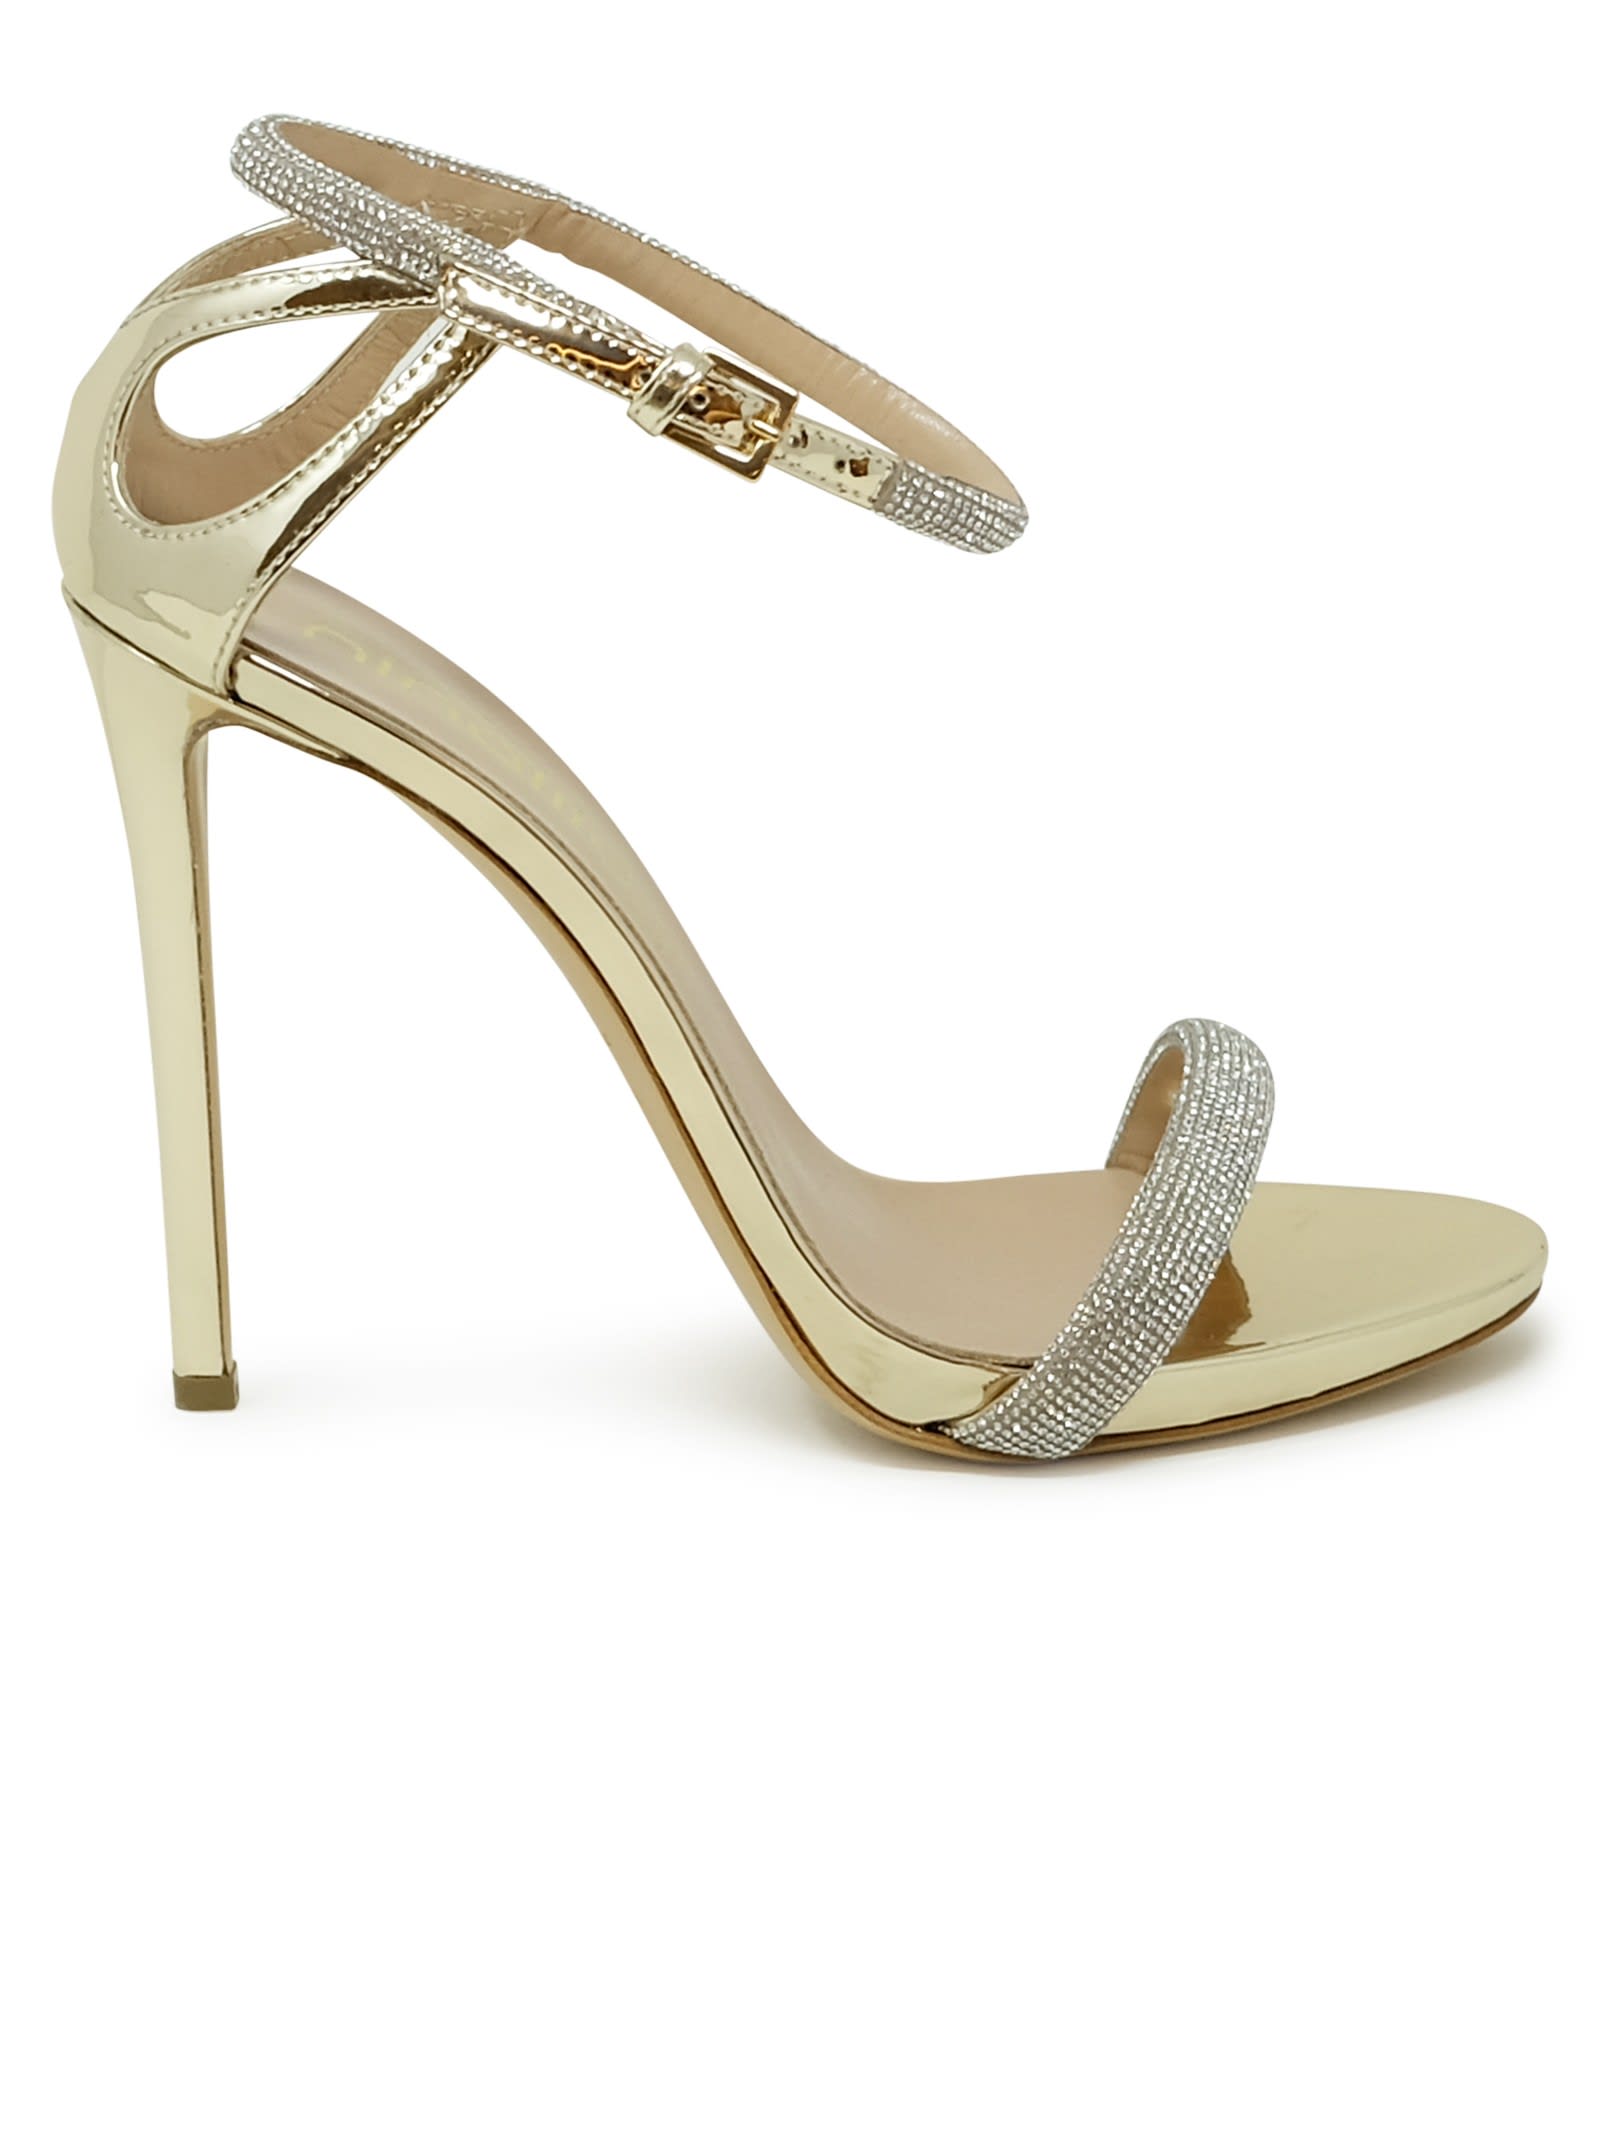 Gold Leather Sandals With Swarovski